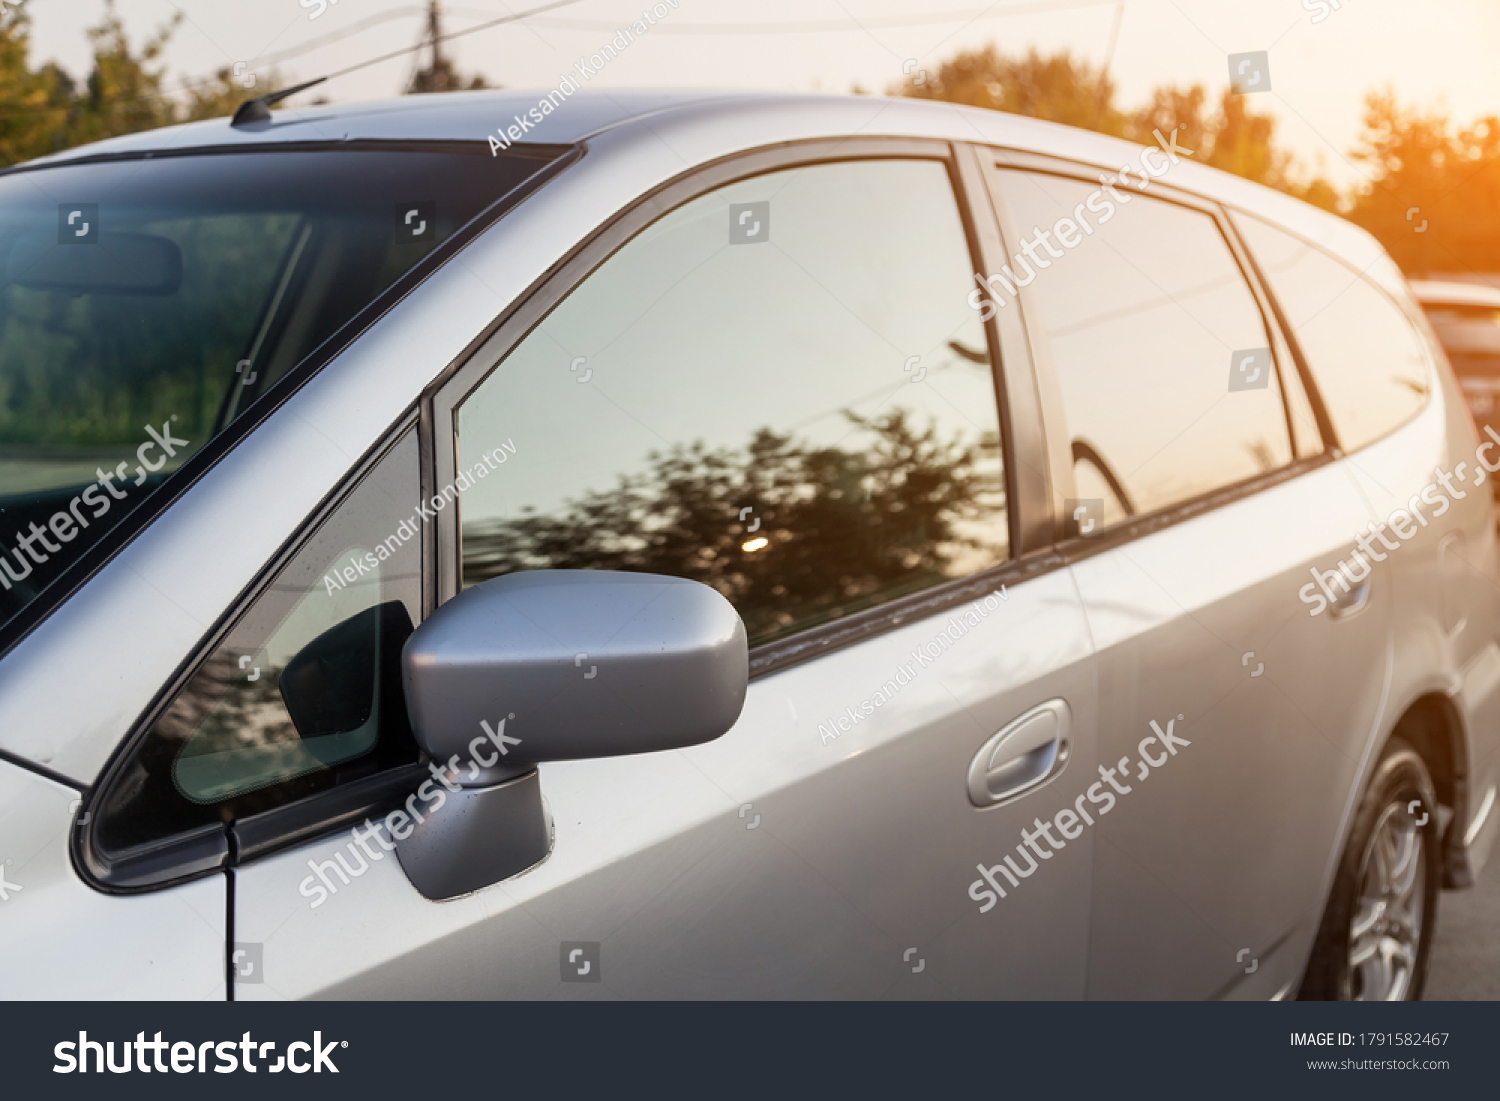 Front view of a Japanese car Honda in the body of a hatchback of the side of a silver station wagon in a parking lot with green trees after being washed ready for sale. #1791582467